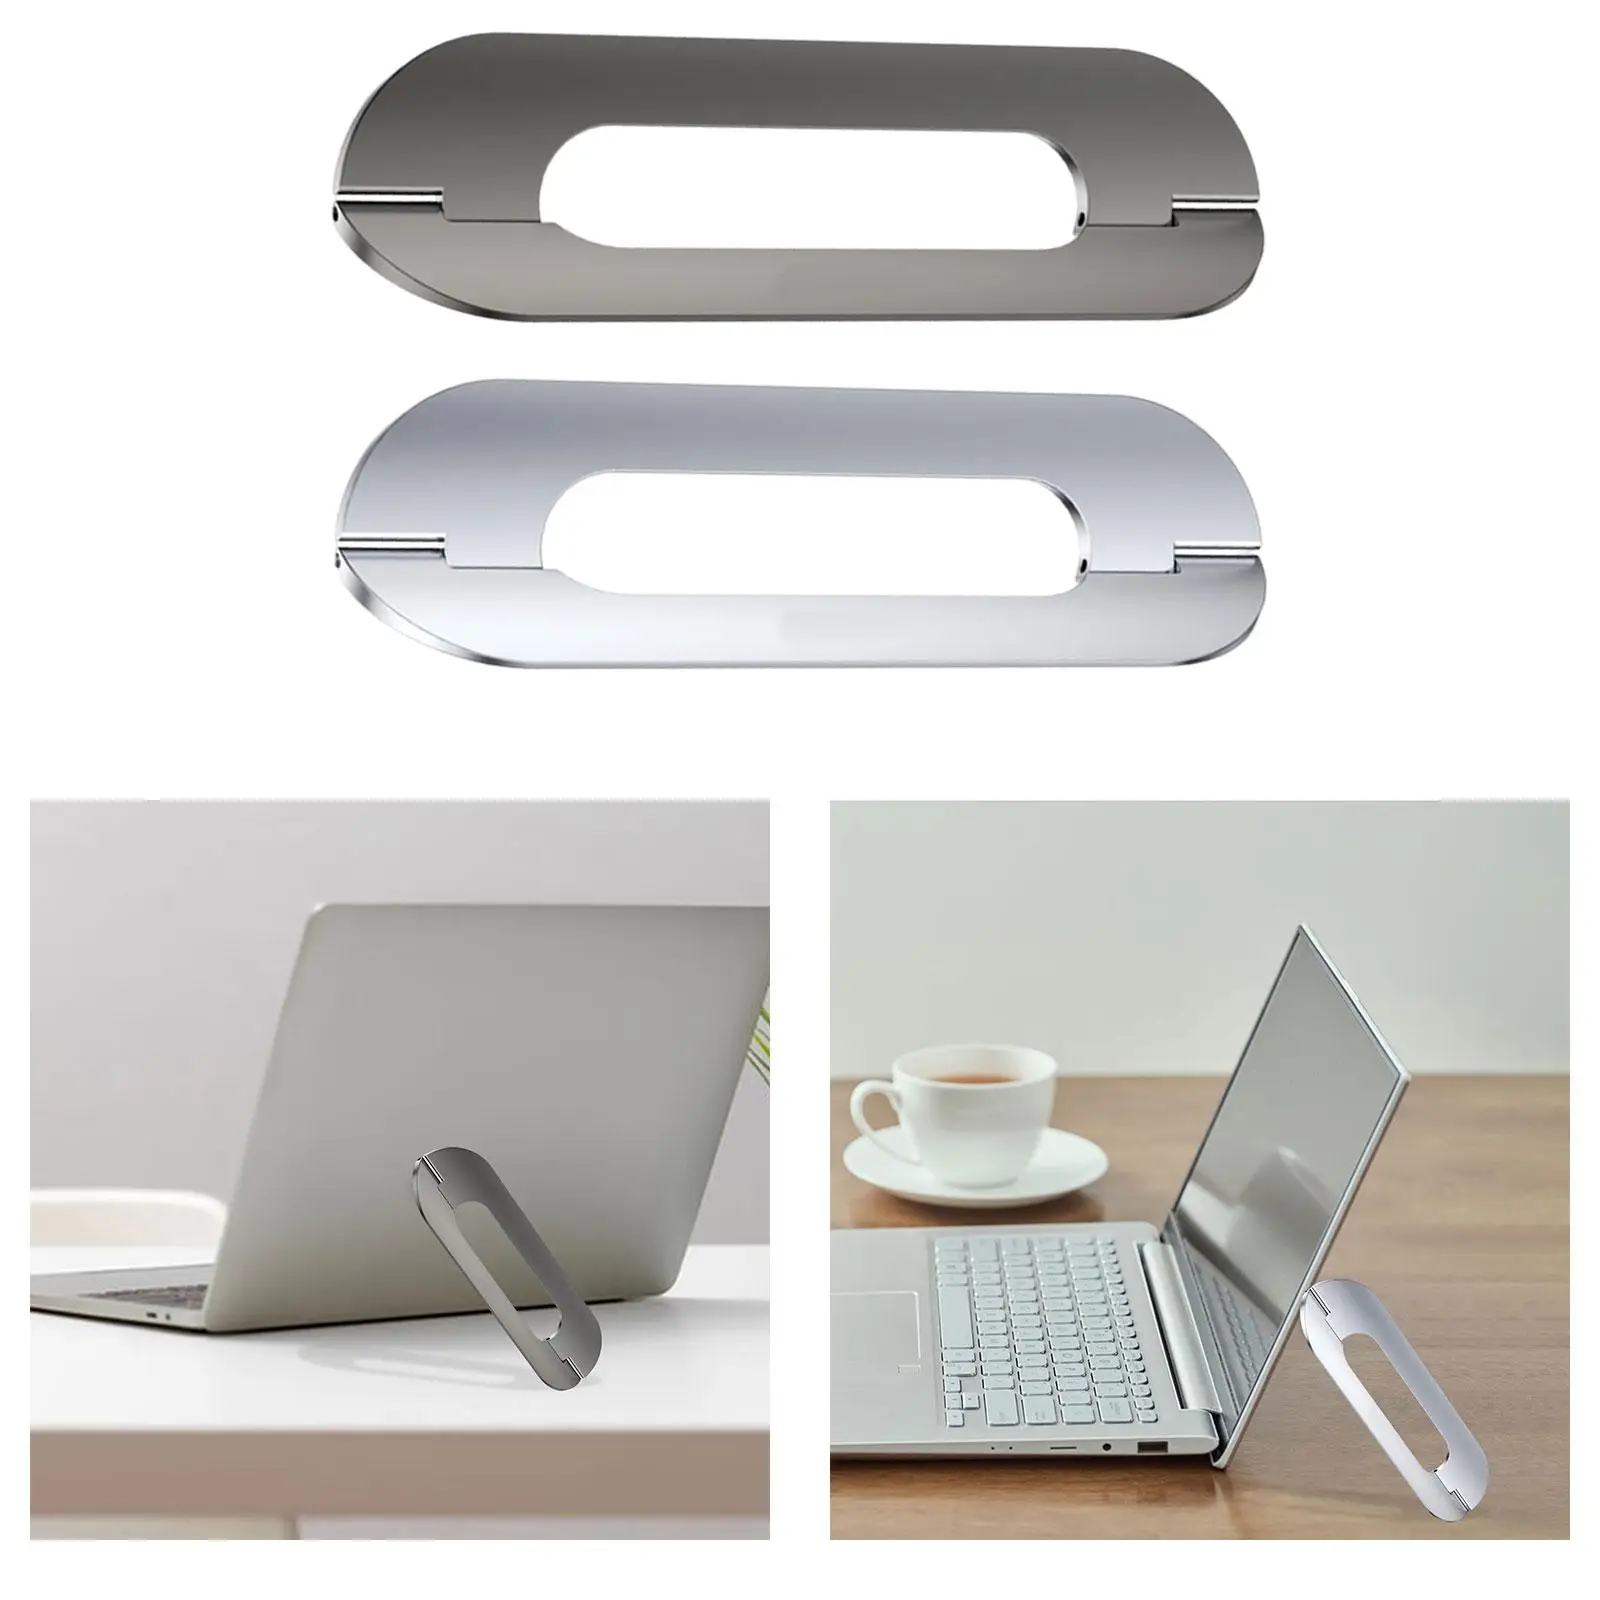 Portable Laptop Stand Ventilated Support Nonslip Base Computer Stand Holder Notebook Riser for Couch School Desk Office Home